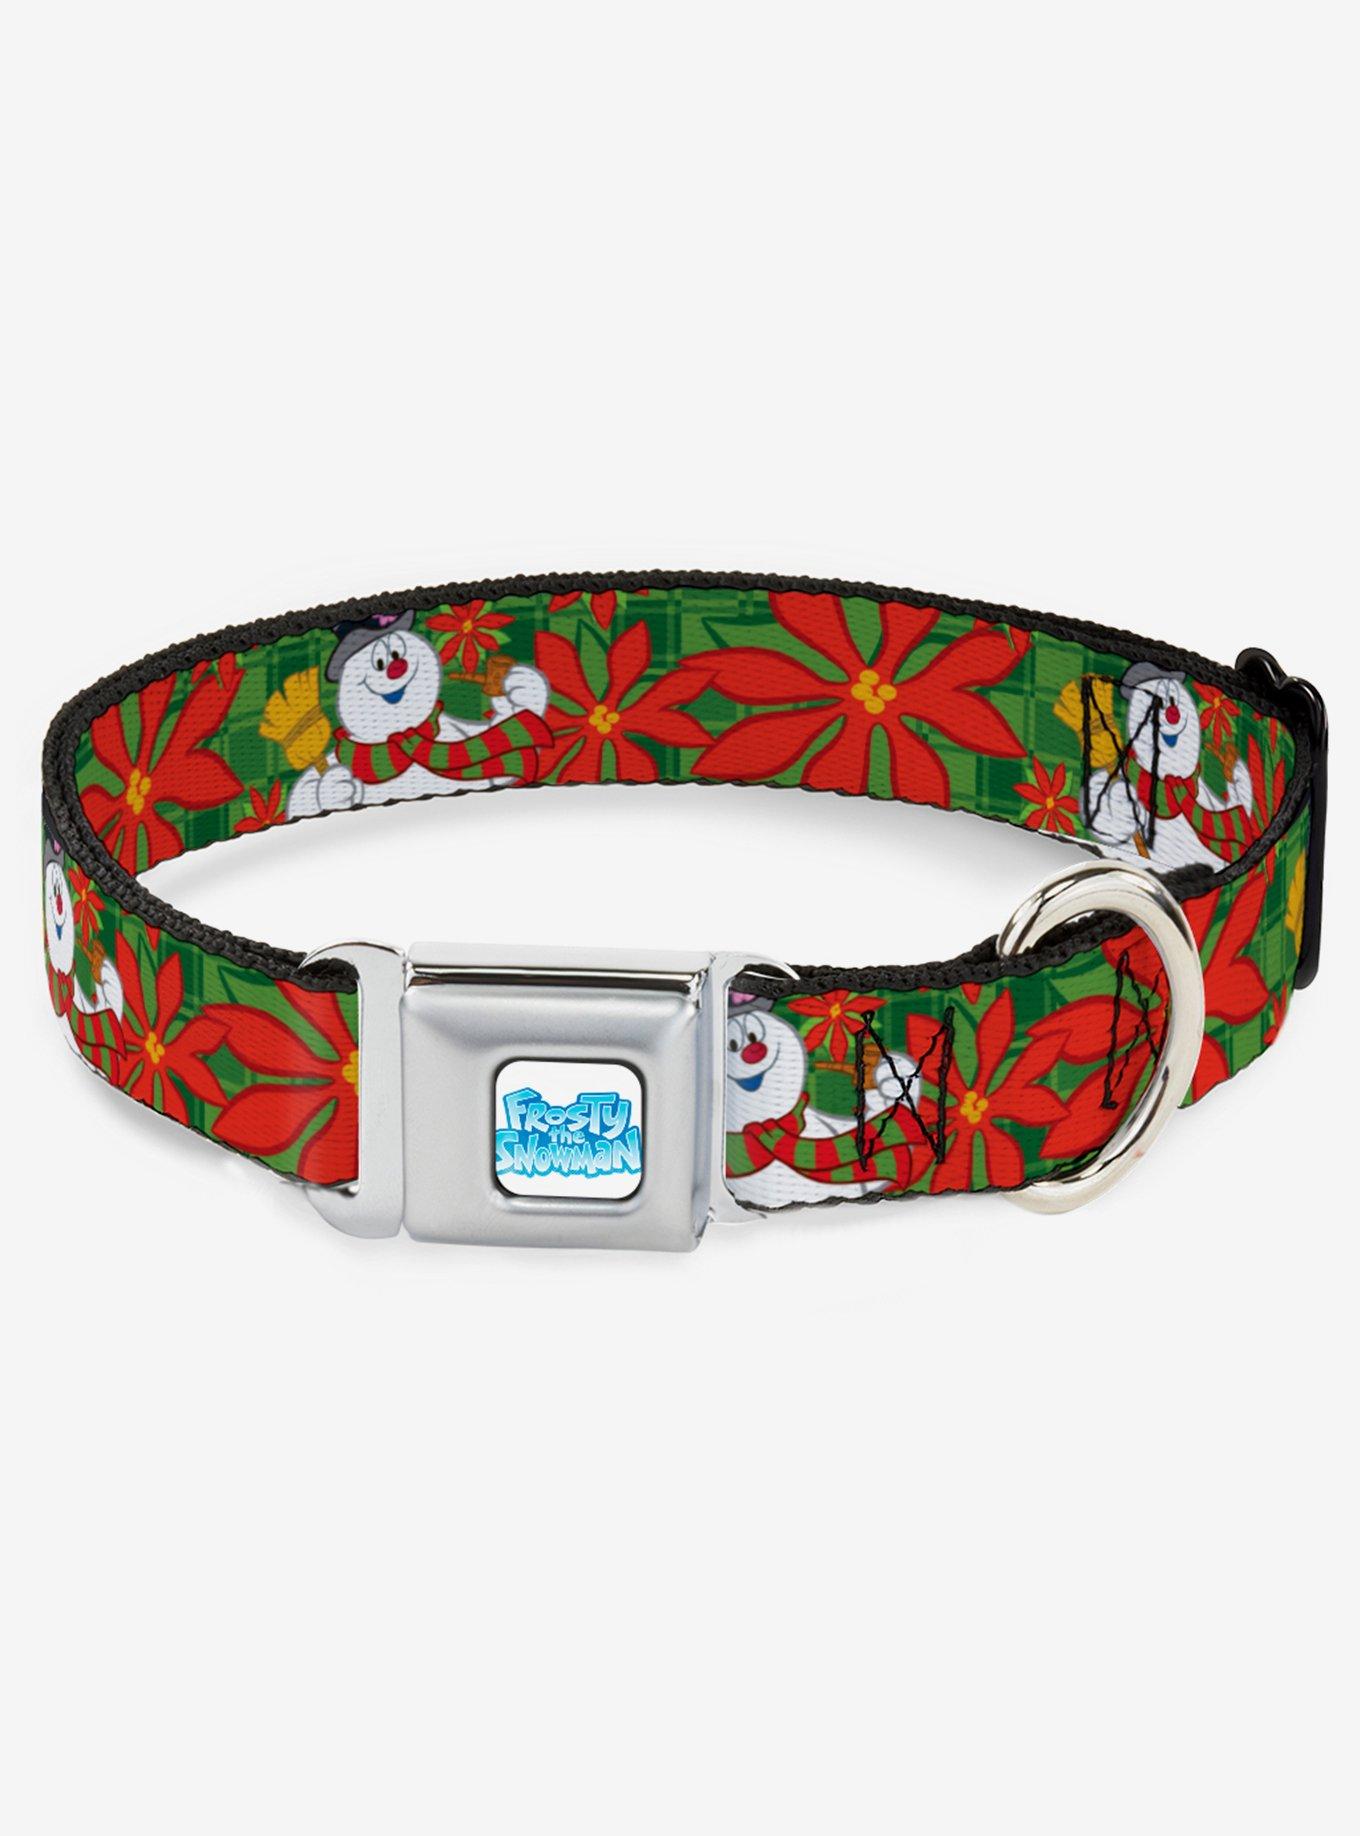 Frosty The Snowman Poinsetta Plaid Seatbelt Dog Collar, RED, hi-res